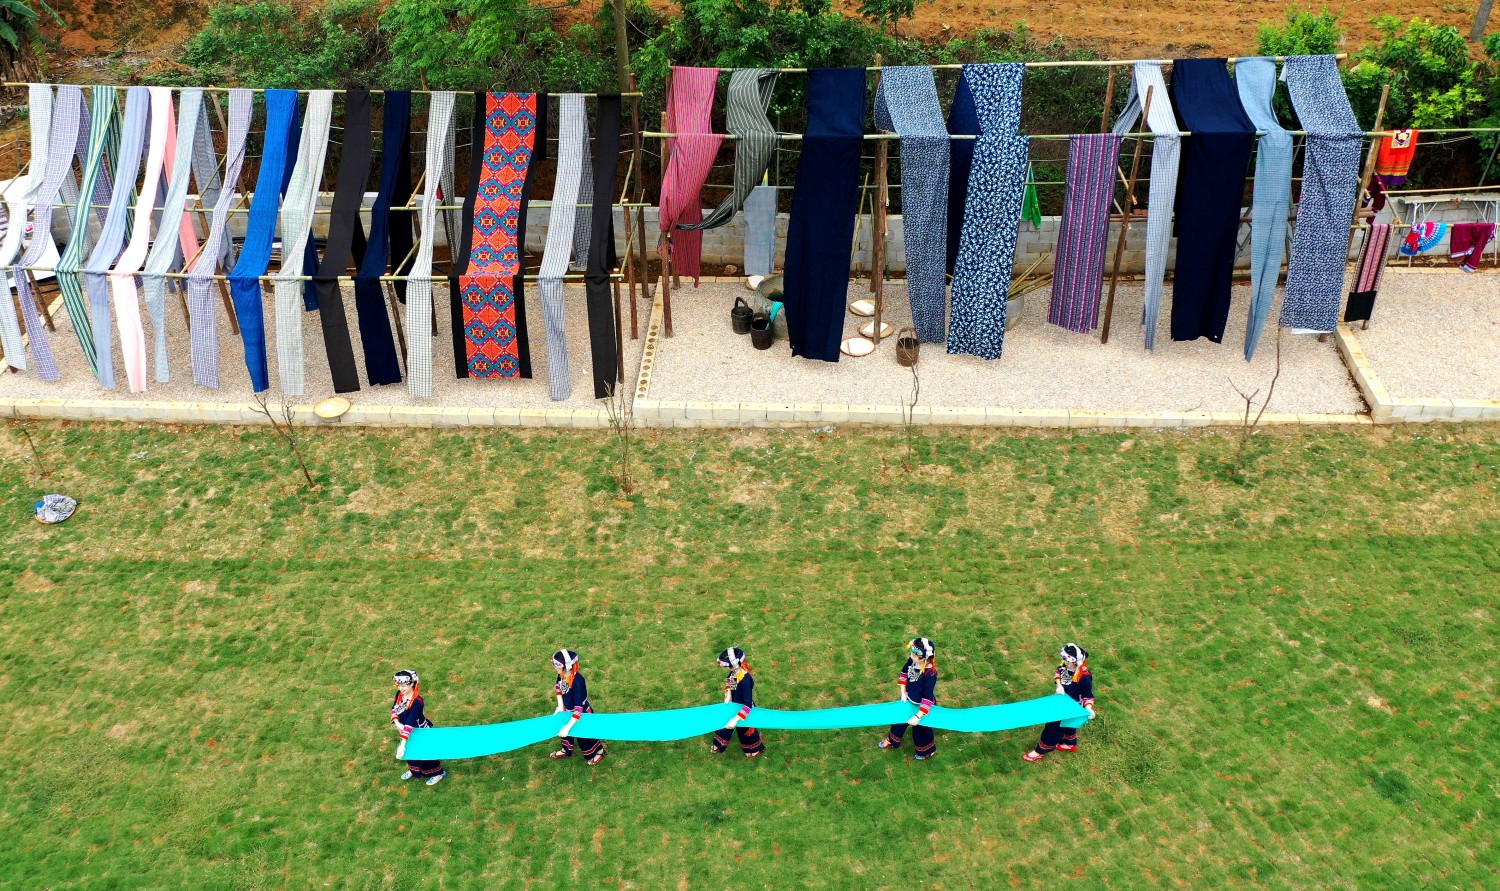 Yao people hang dyed clothes in Hechi of south China's Guangxi Zhuang Autonomous Region, on April 23, 2023. /CNSPHOTO